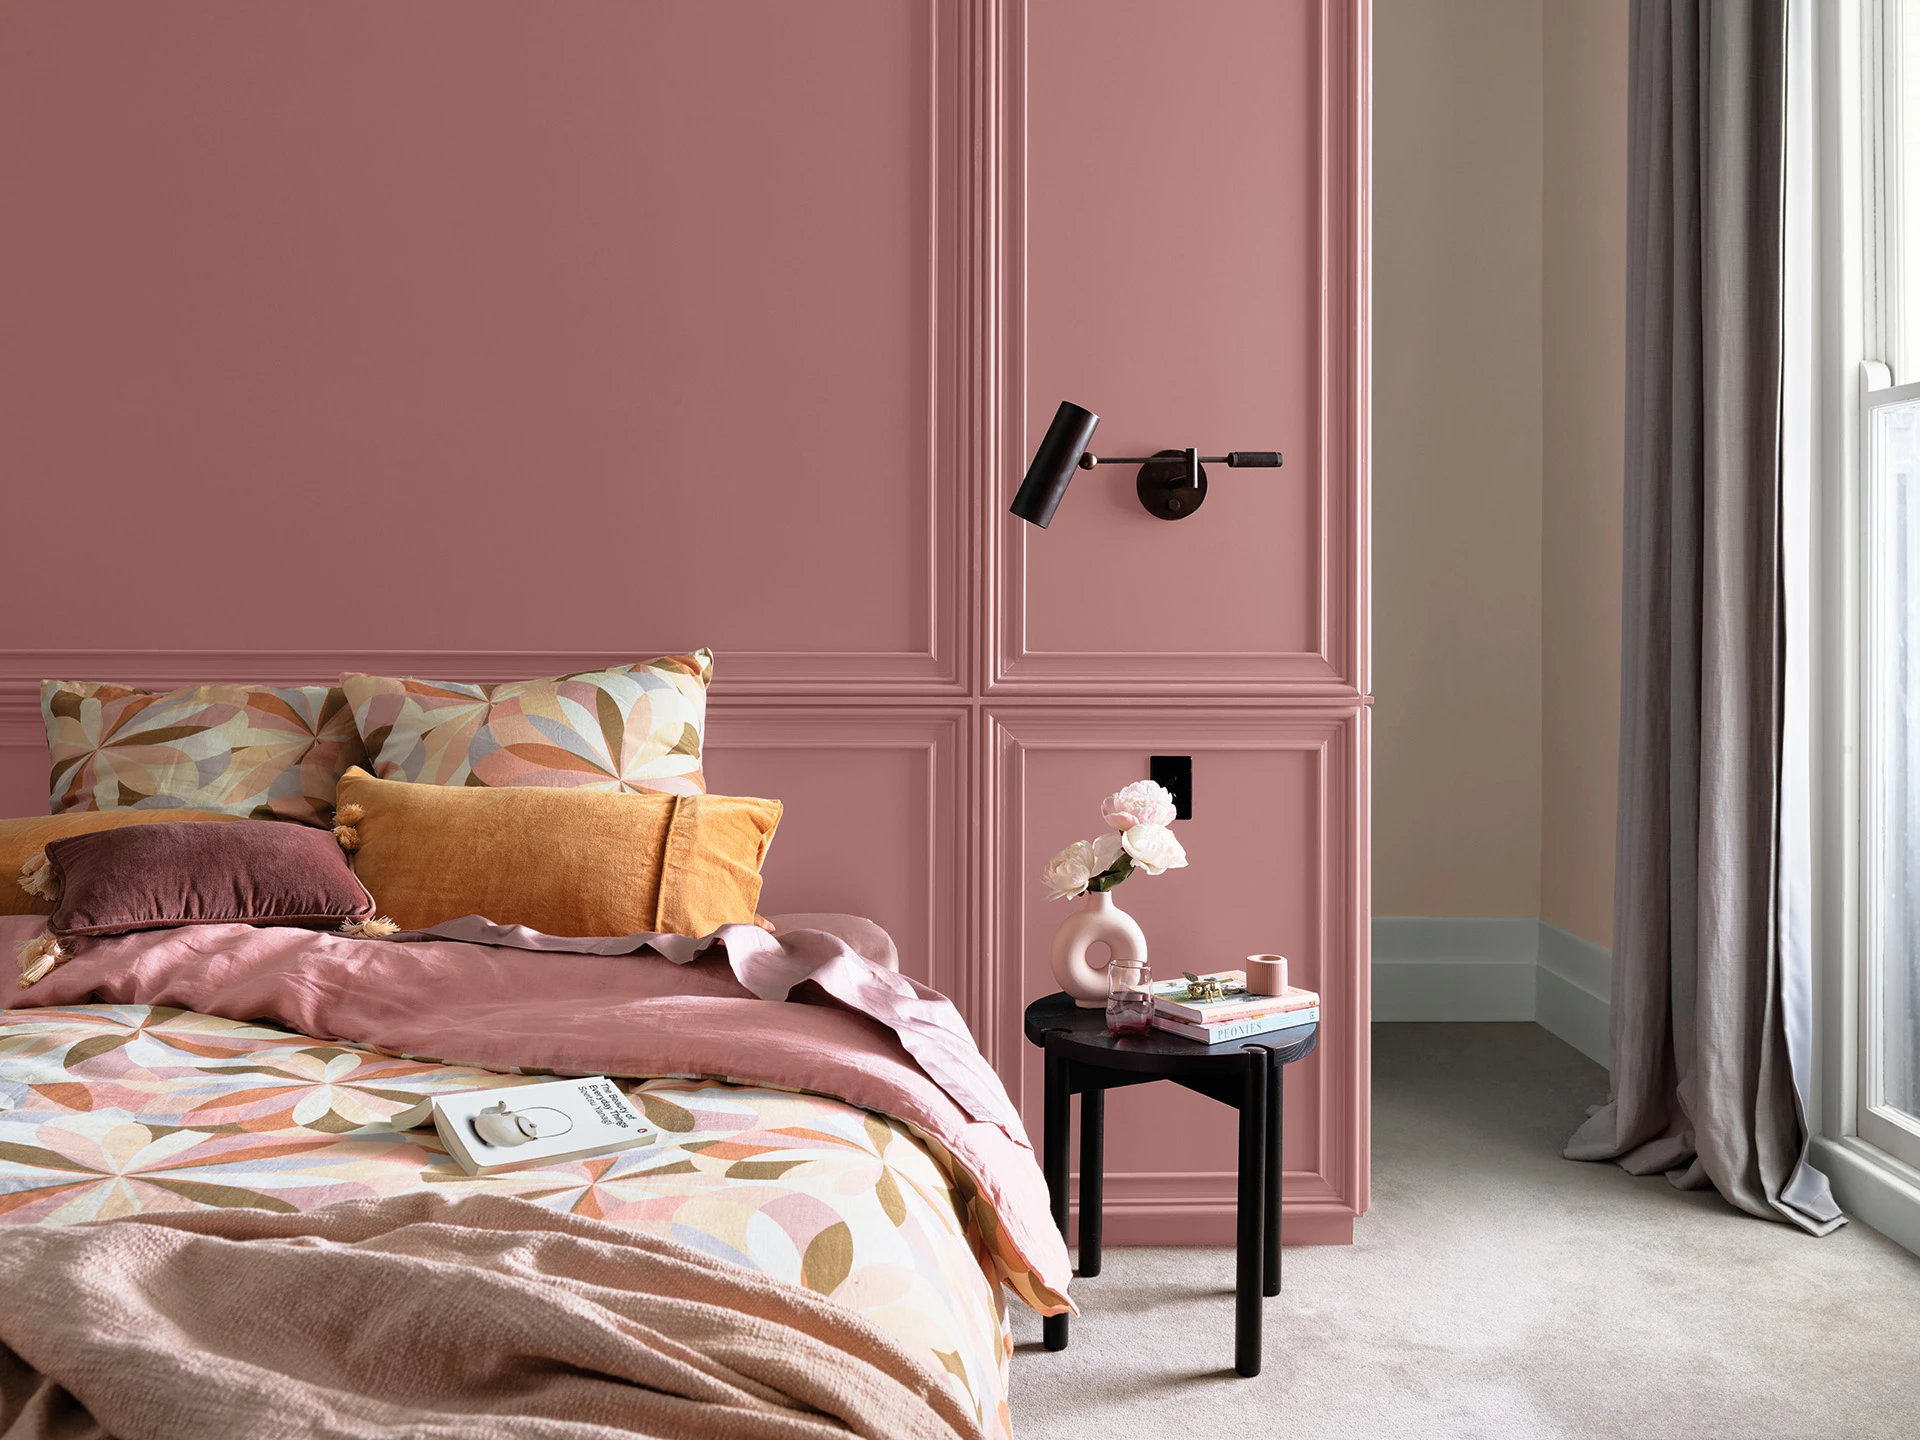 How to bring a pop of pink into your home